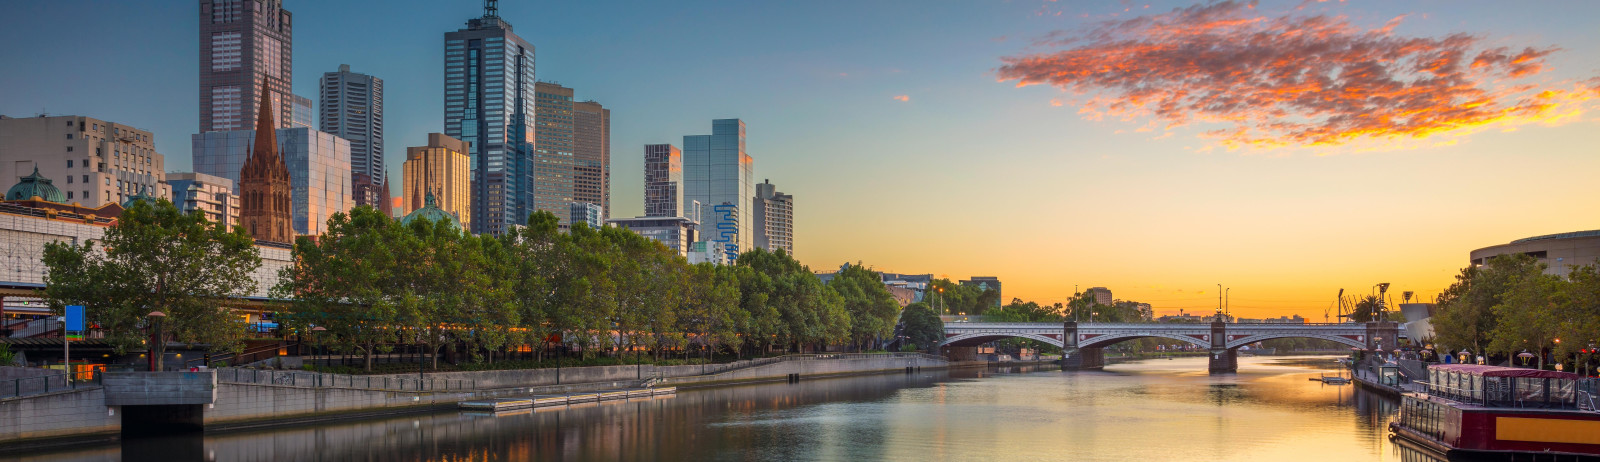 Summer sunrise view of the City of Melbourne, Australia